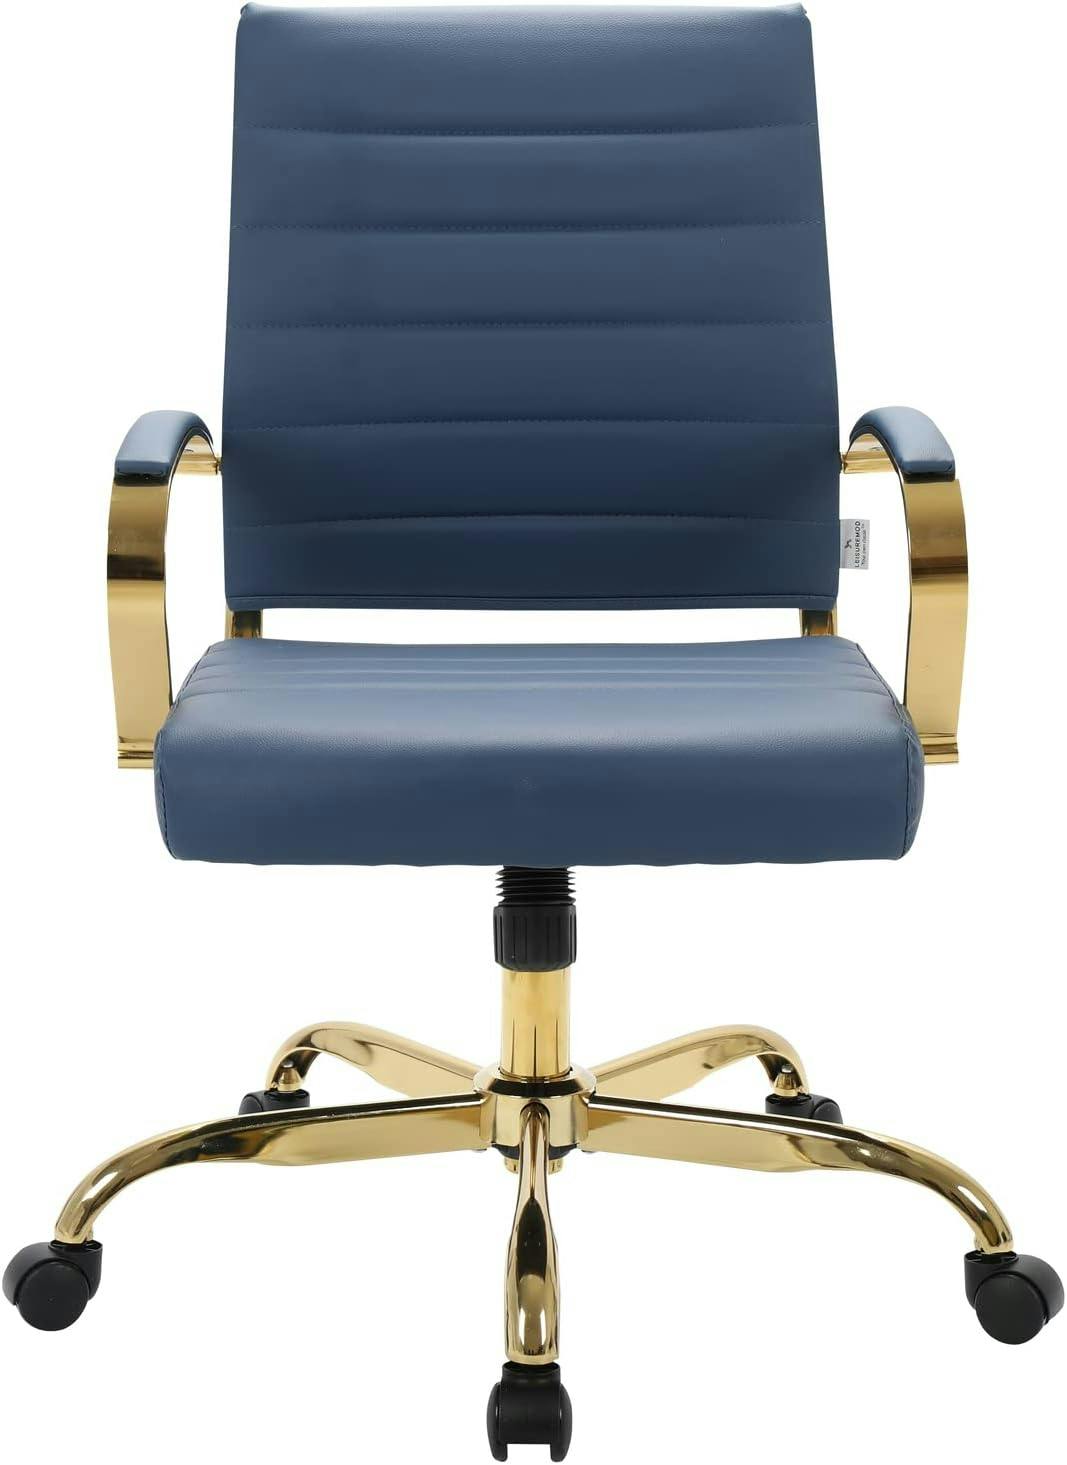 Navy Blue Mid-Century Modern Swivel Leather Office Chair with Gold Metal Frame